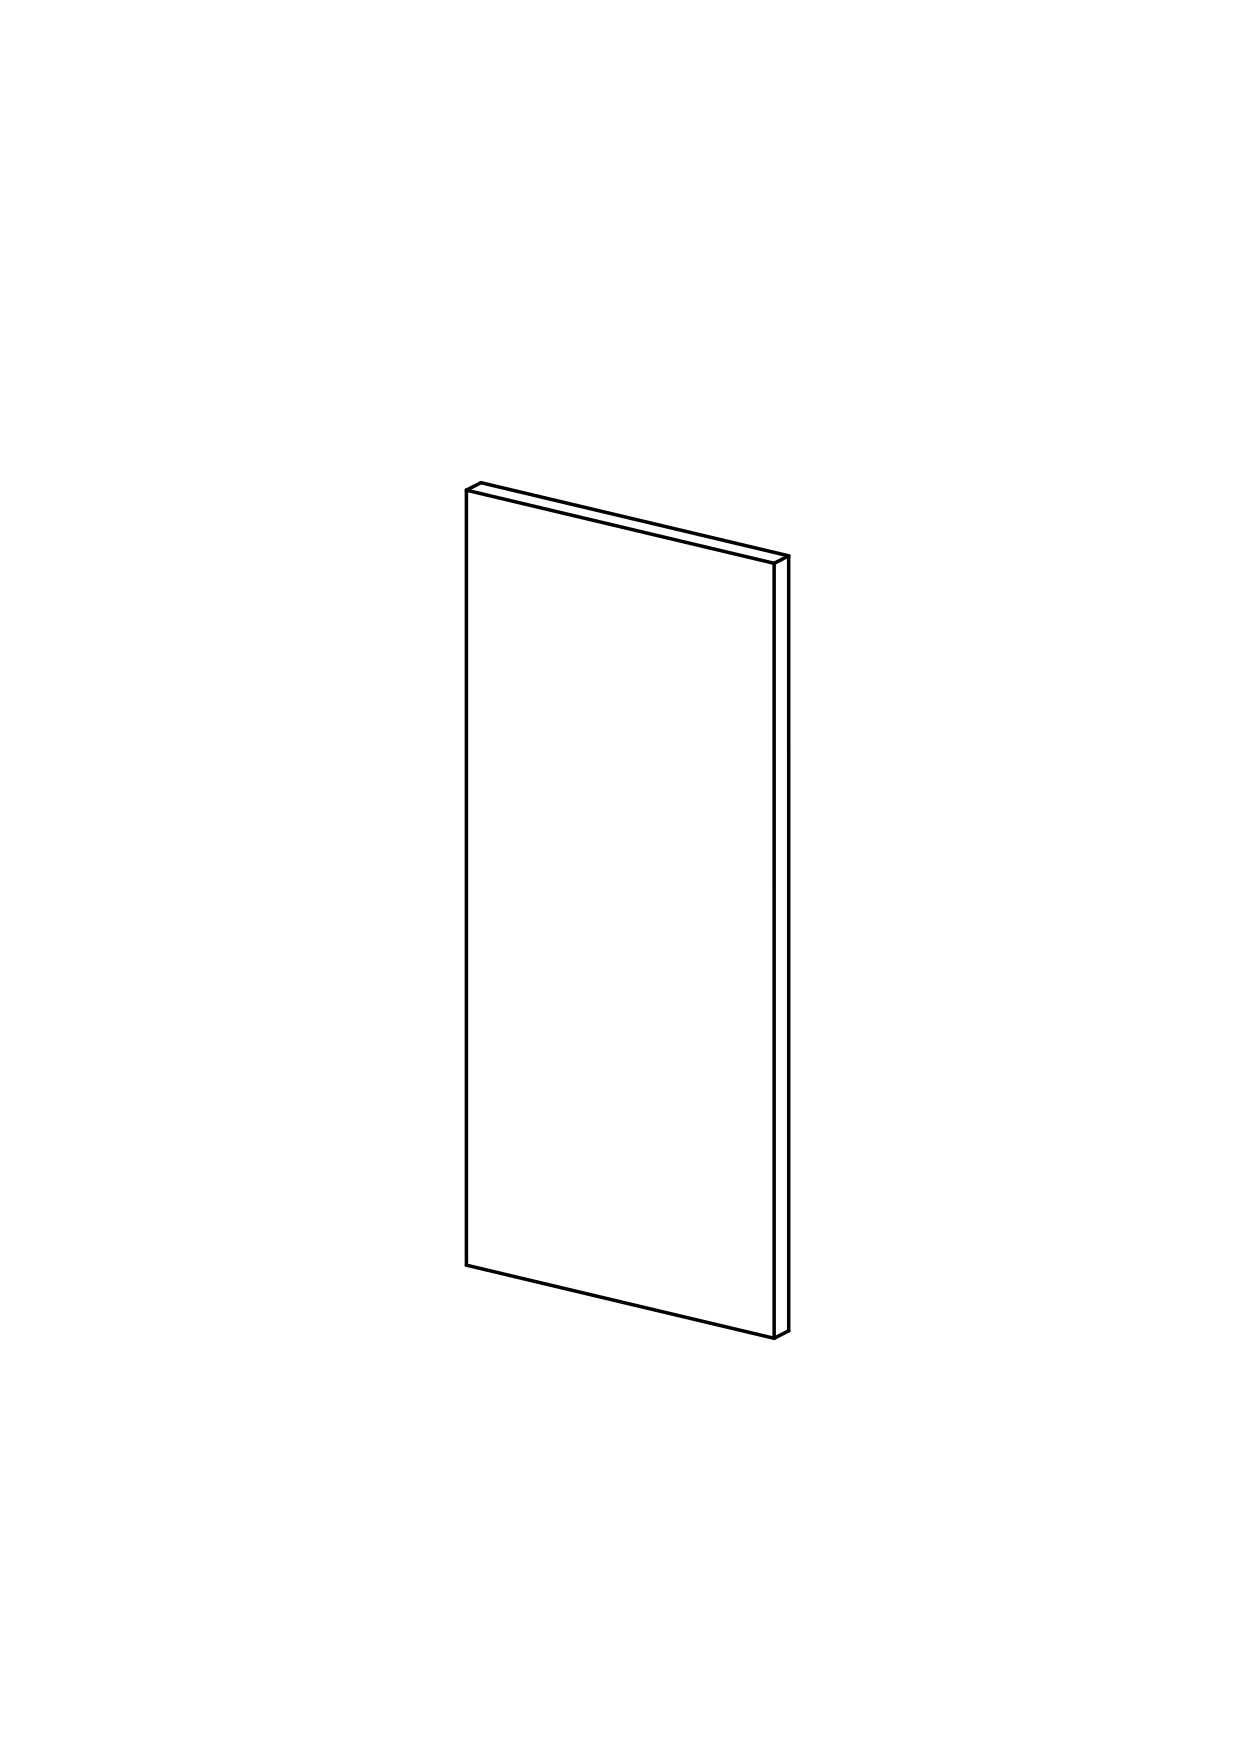 62x140 - Cover Panel - Plain - Unpainted (Raw) - METOD